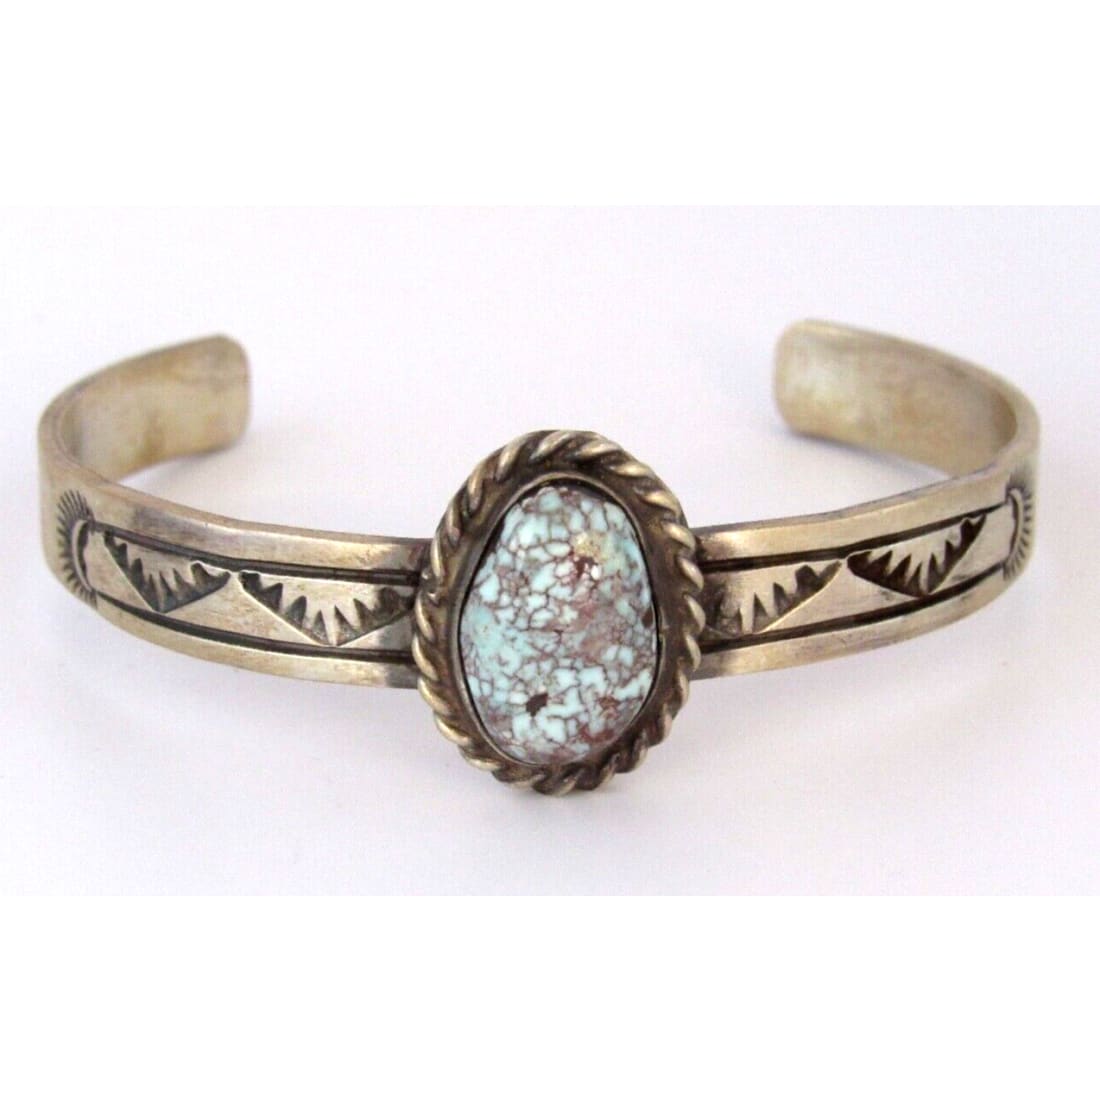 Navajo Dry Creek Turquoise Stacker Cuff Sterling Hand